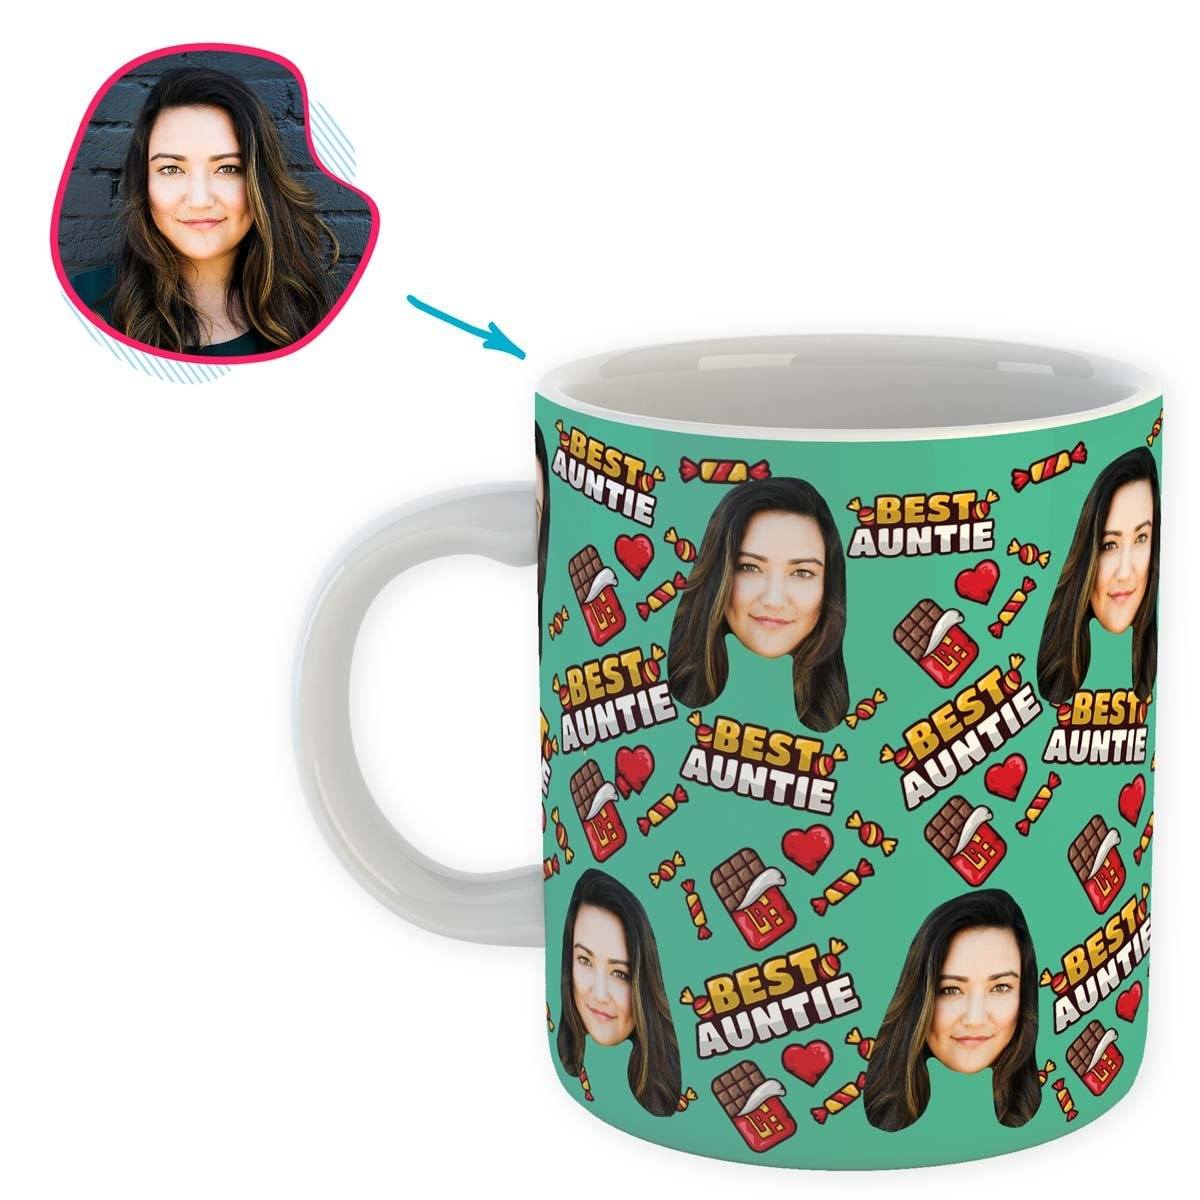 Mint Auntie personalized mug with photo of face printed on it